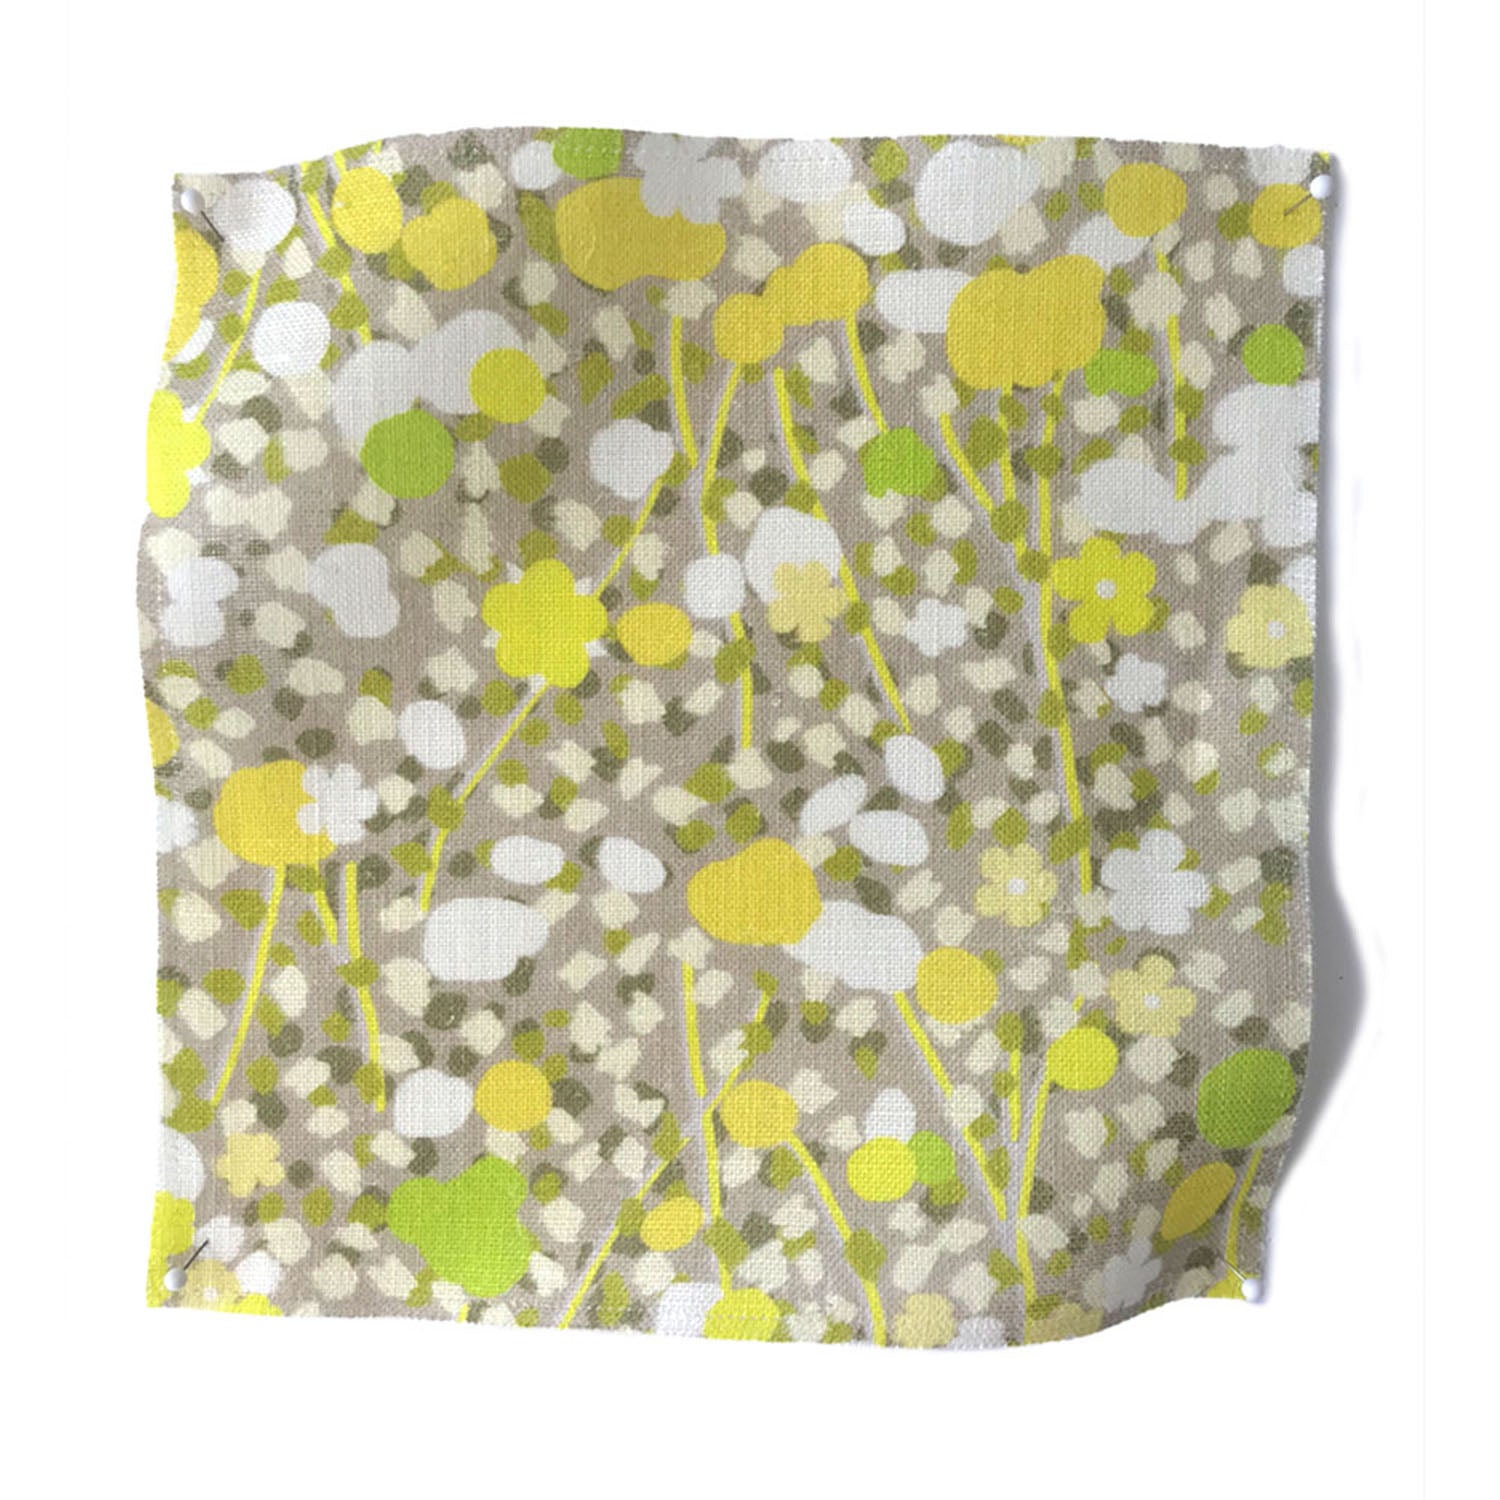 Square fabric swatch in a dense botanical print in shades of green, yellow and white.